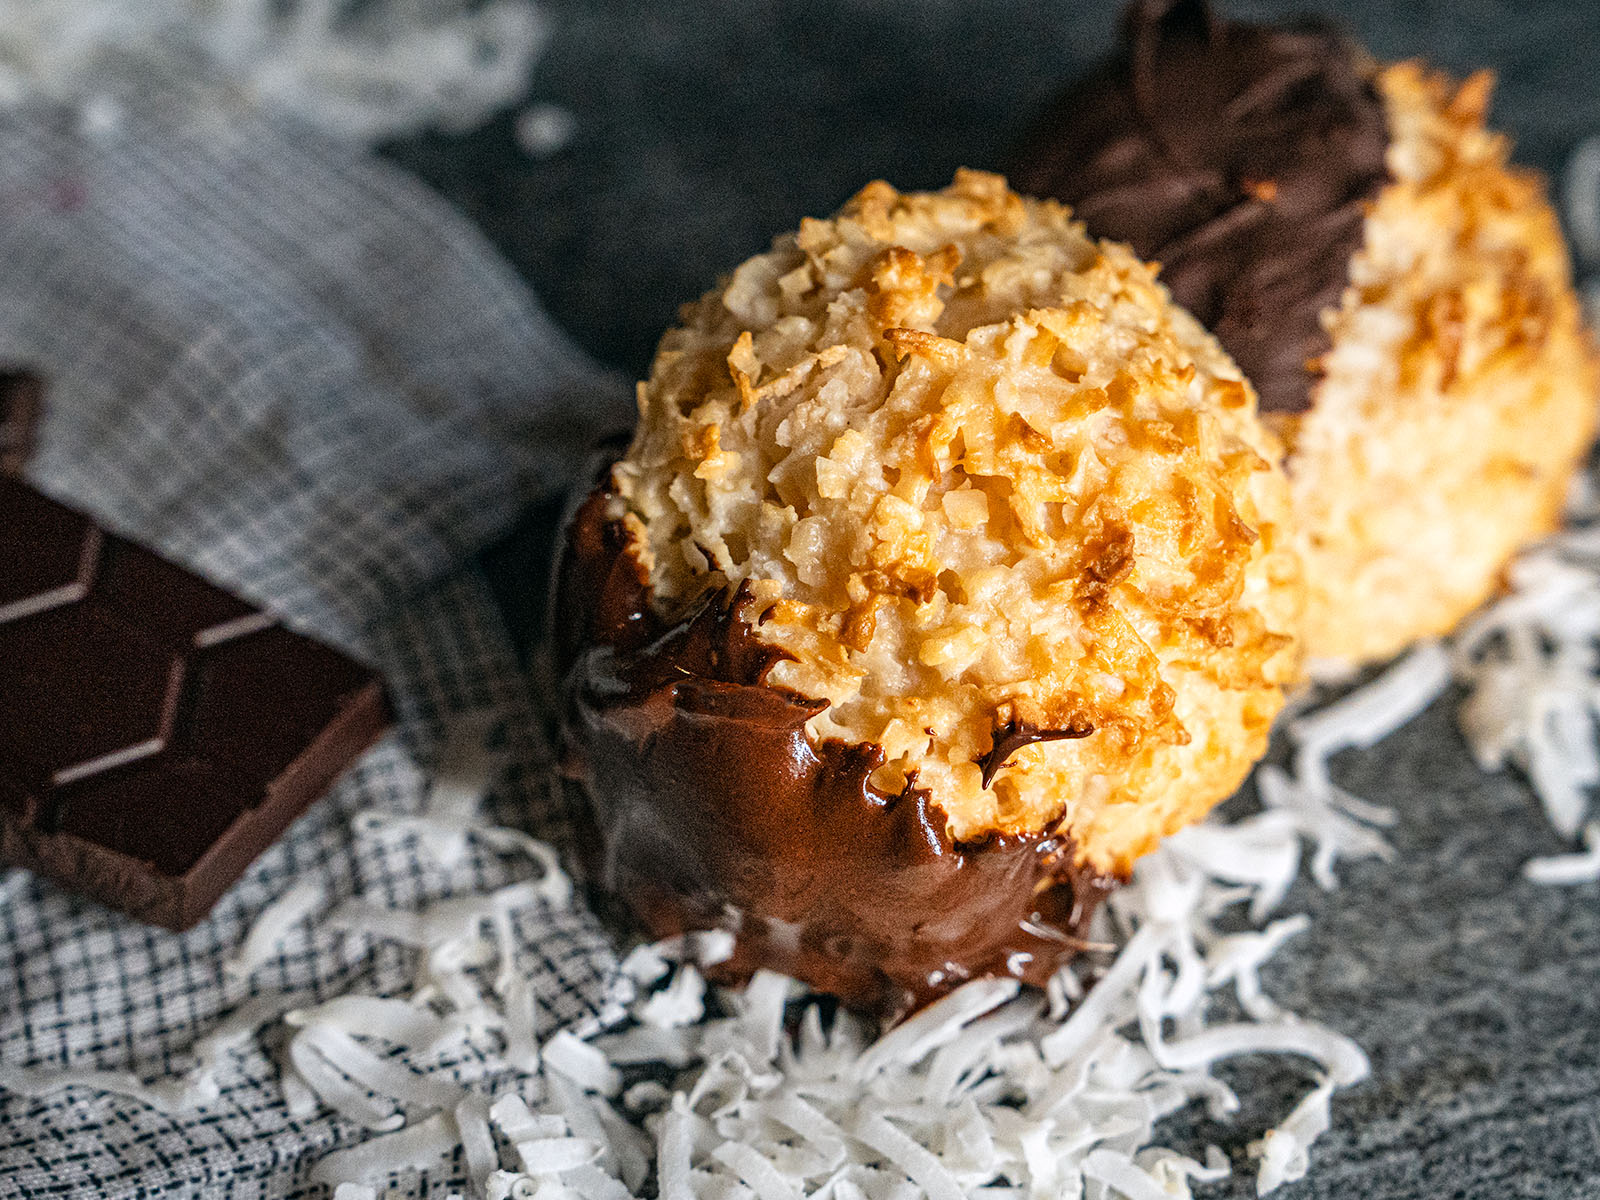 A freshly dipped coconut macaroon sits beside a chocolate bar, surrounded by coconut flakes